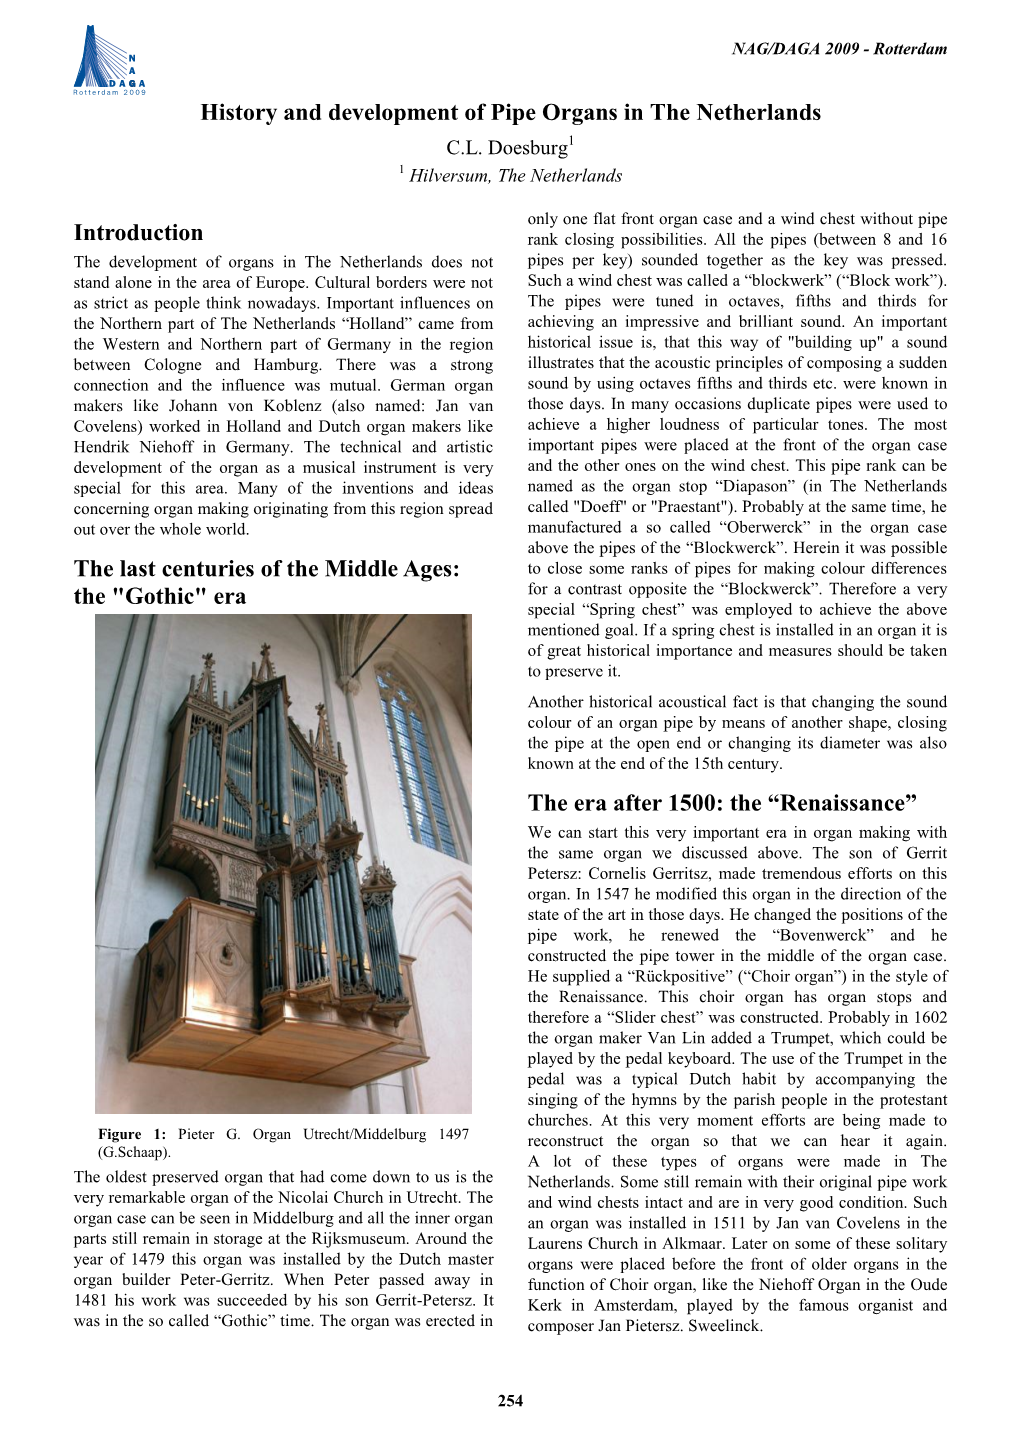 History and Development of Pipe Organs in the Netherlands C.L